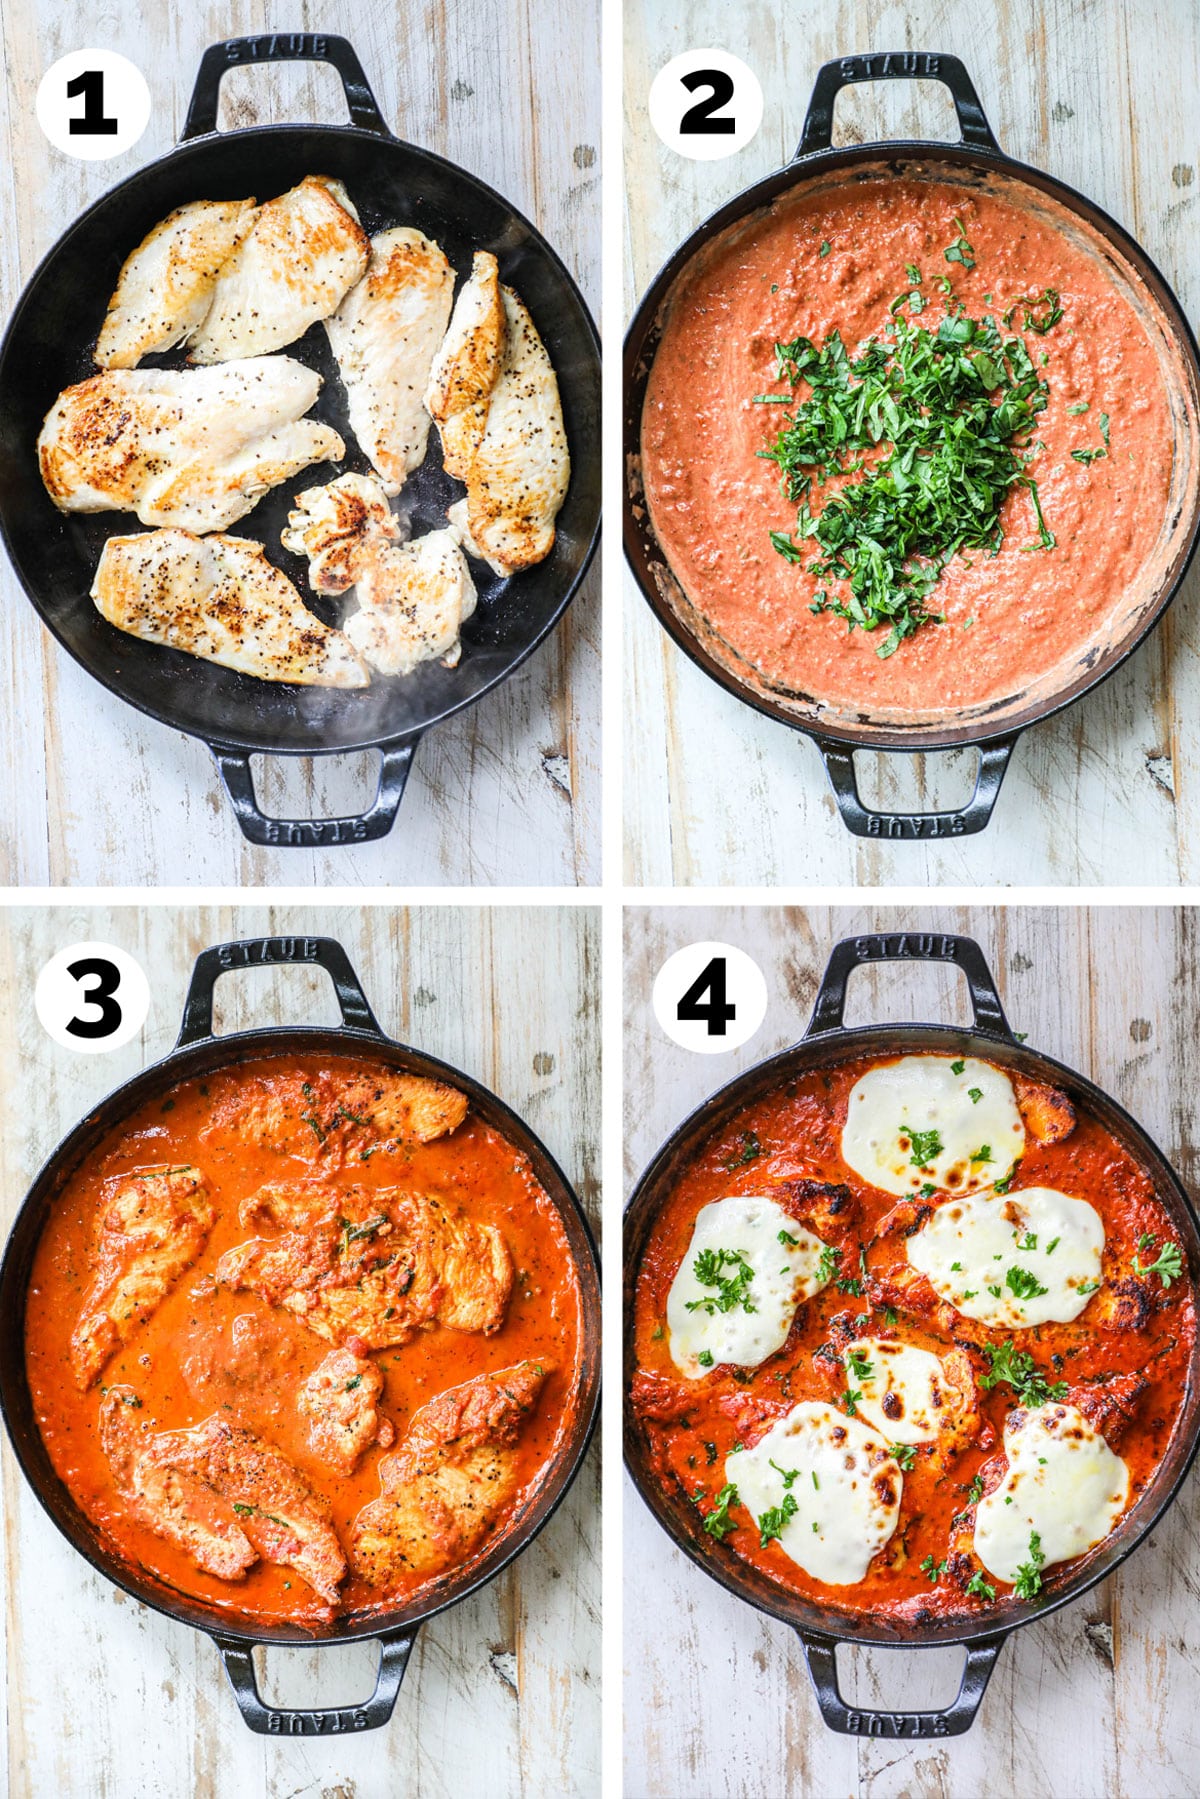 Step by Step for how to make Chicken Mozzarella Skillet 1. Brown Chicken breast in skillet. 2. Make creamy sauce and mix in fresh basil. 3 Add chicken back into sauce and simmer. 4. Top with fresh mozzarella cheese.